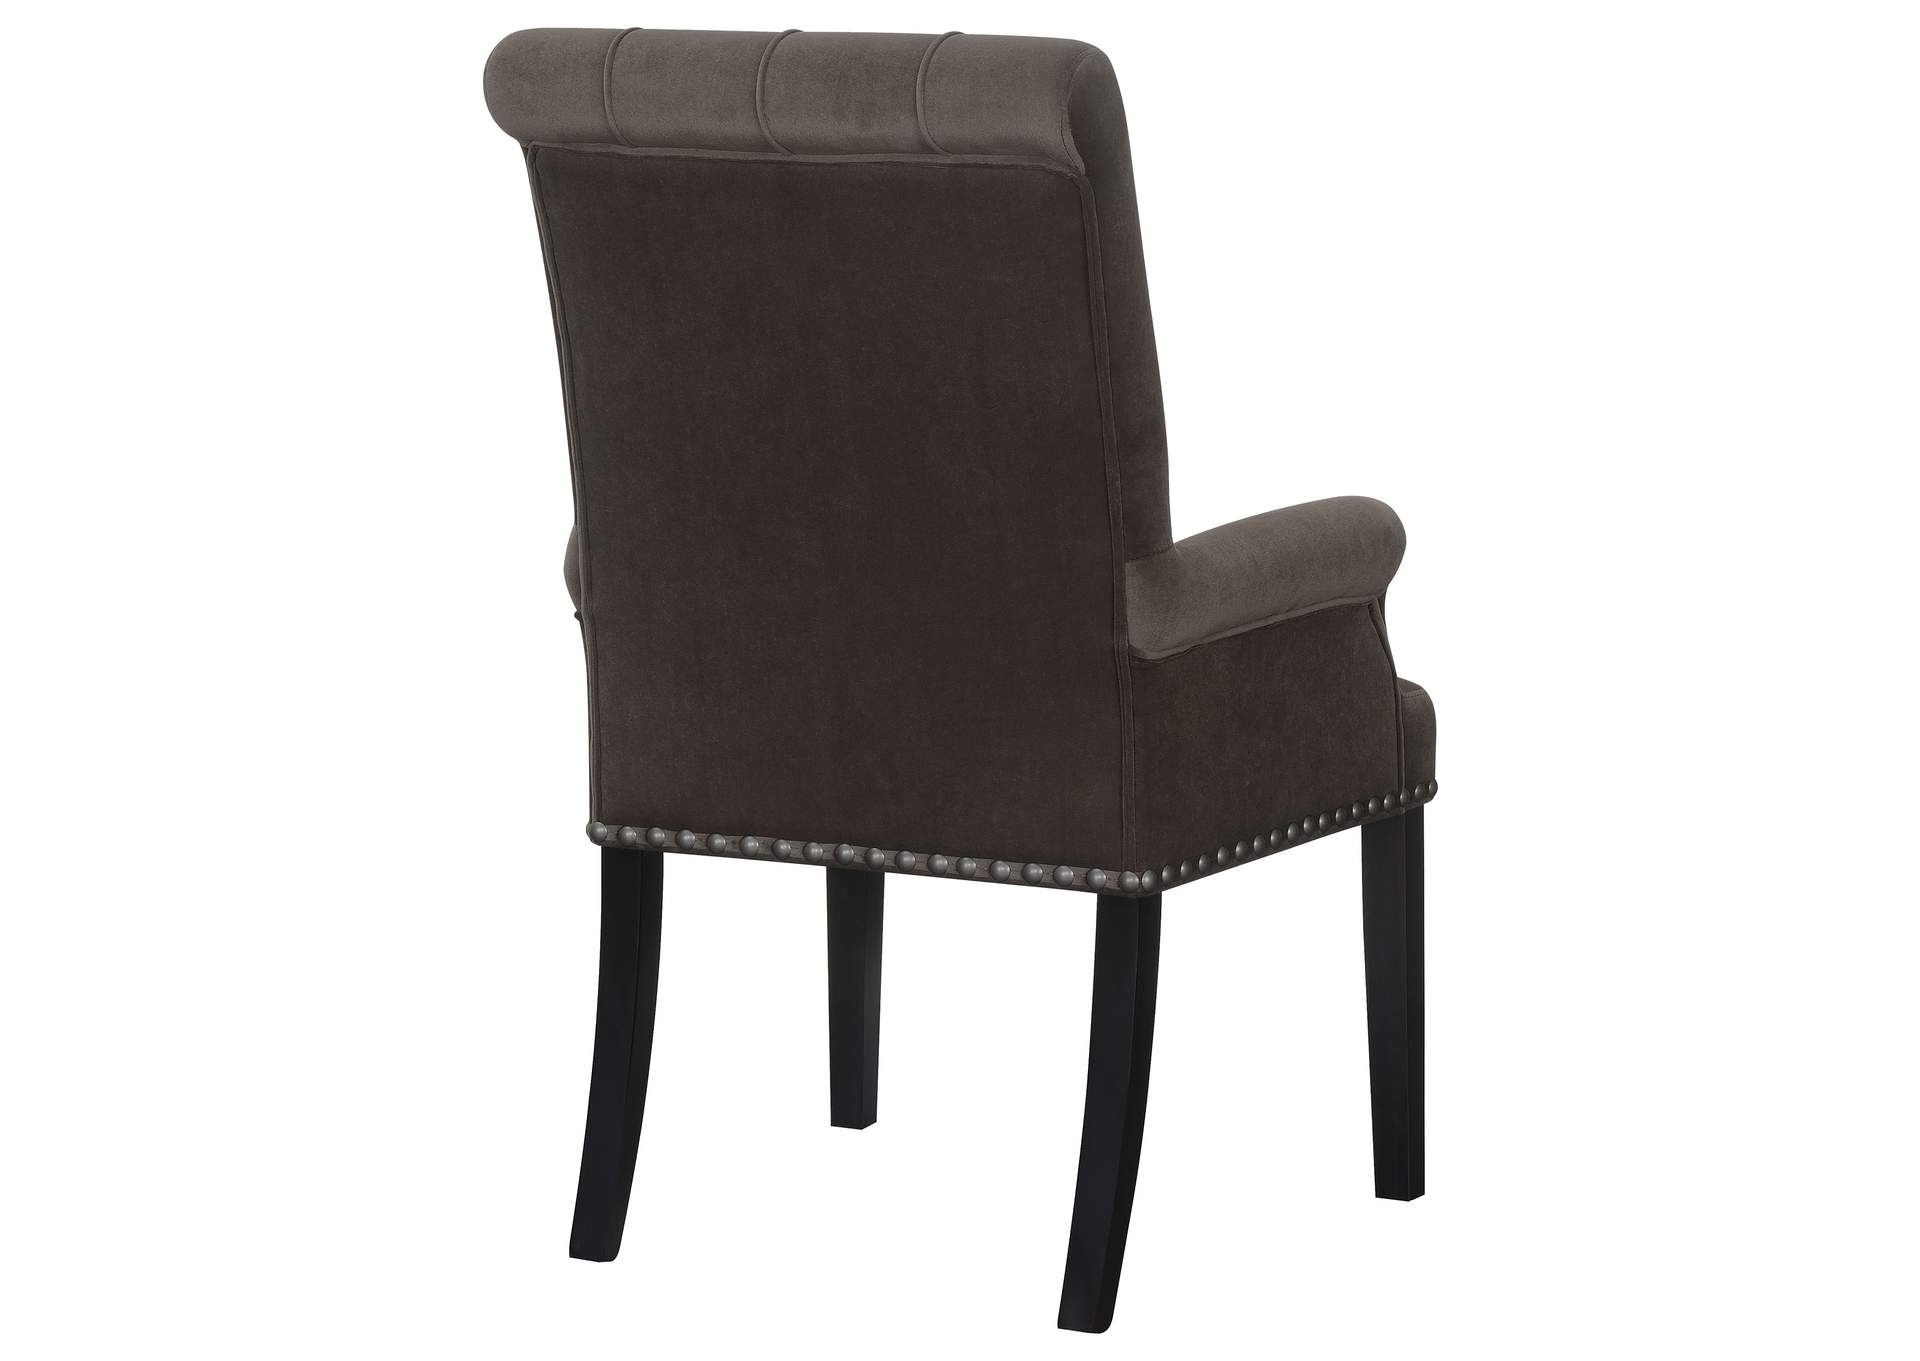 Alana Upholstered Tufted Arm Chair with Nailhead Trim,Coaster Furniture